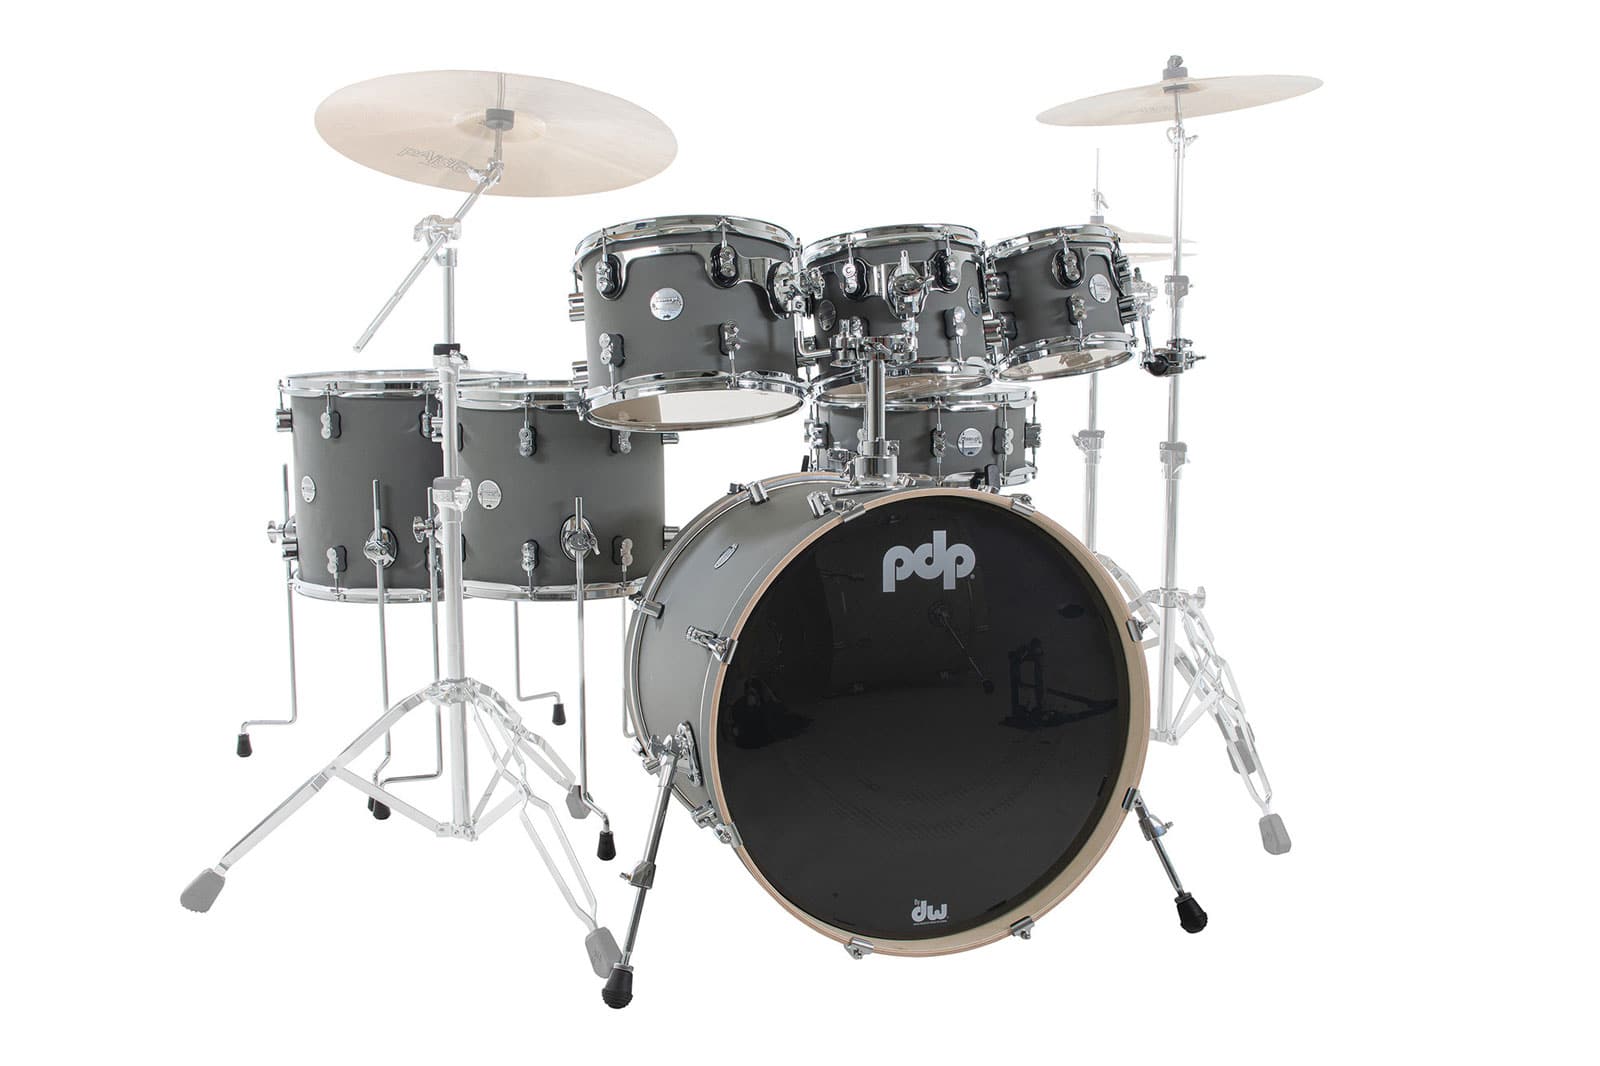 PDP BY DW CONCEPT MAPLE FINISH PLY CM7 KIT 22